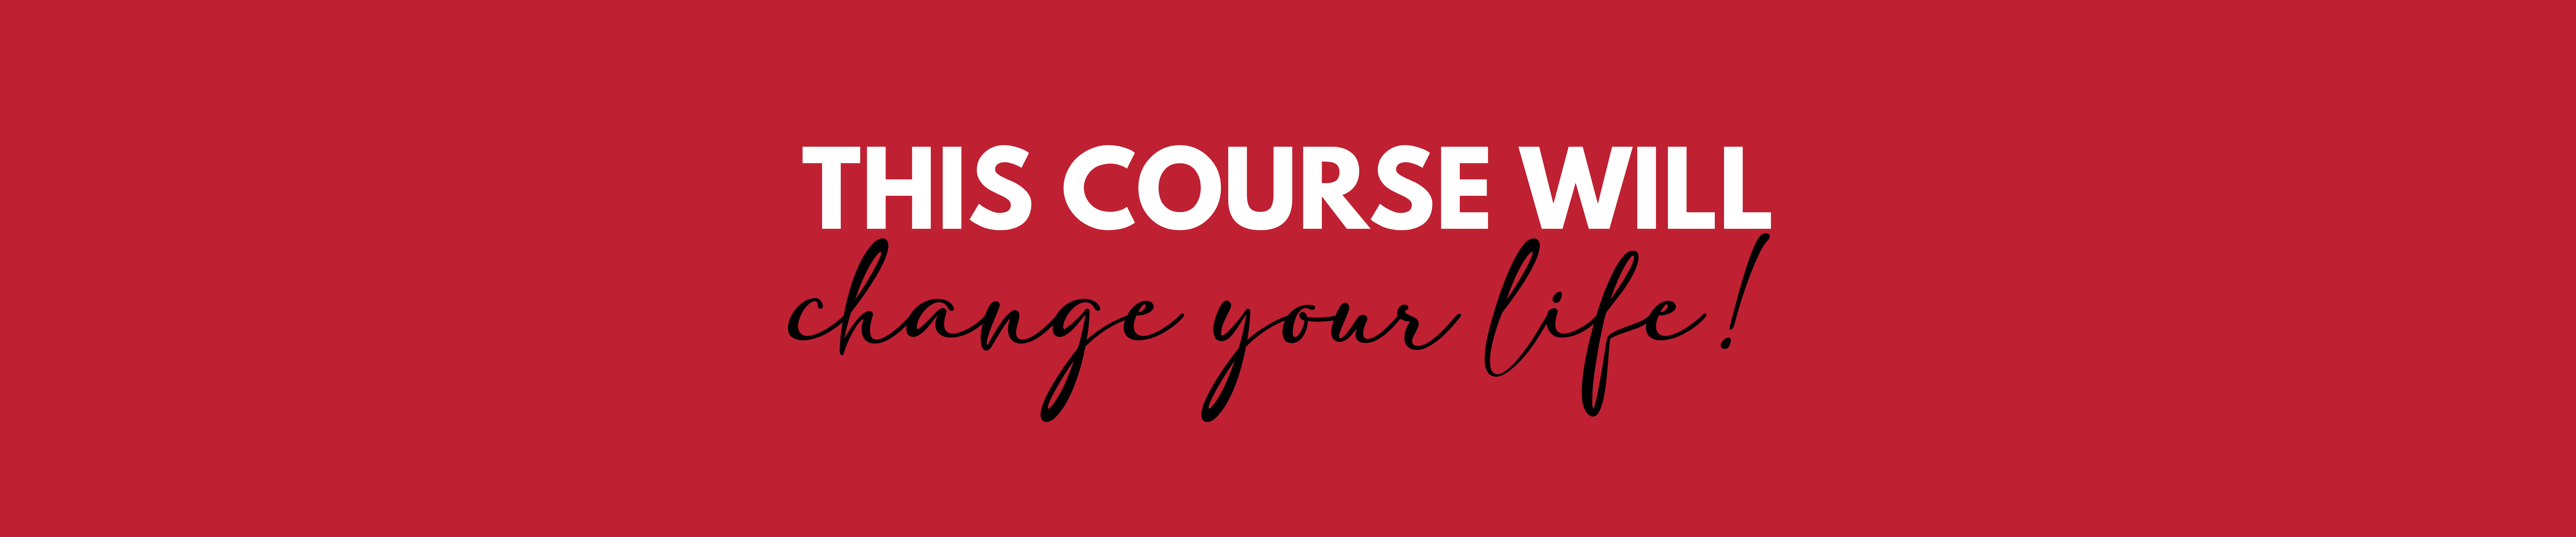 This course will change your life!